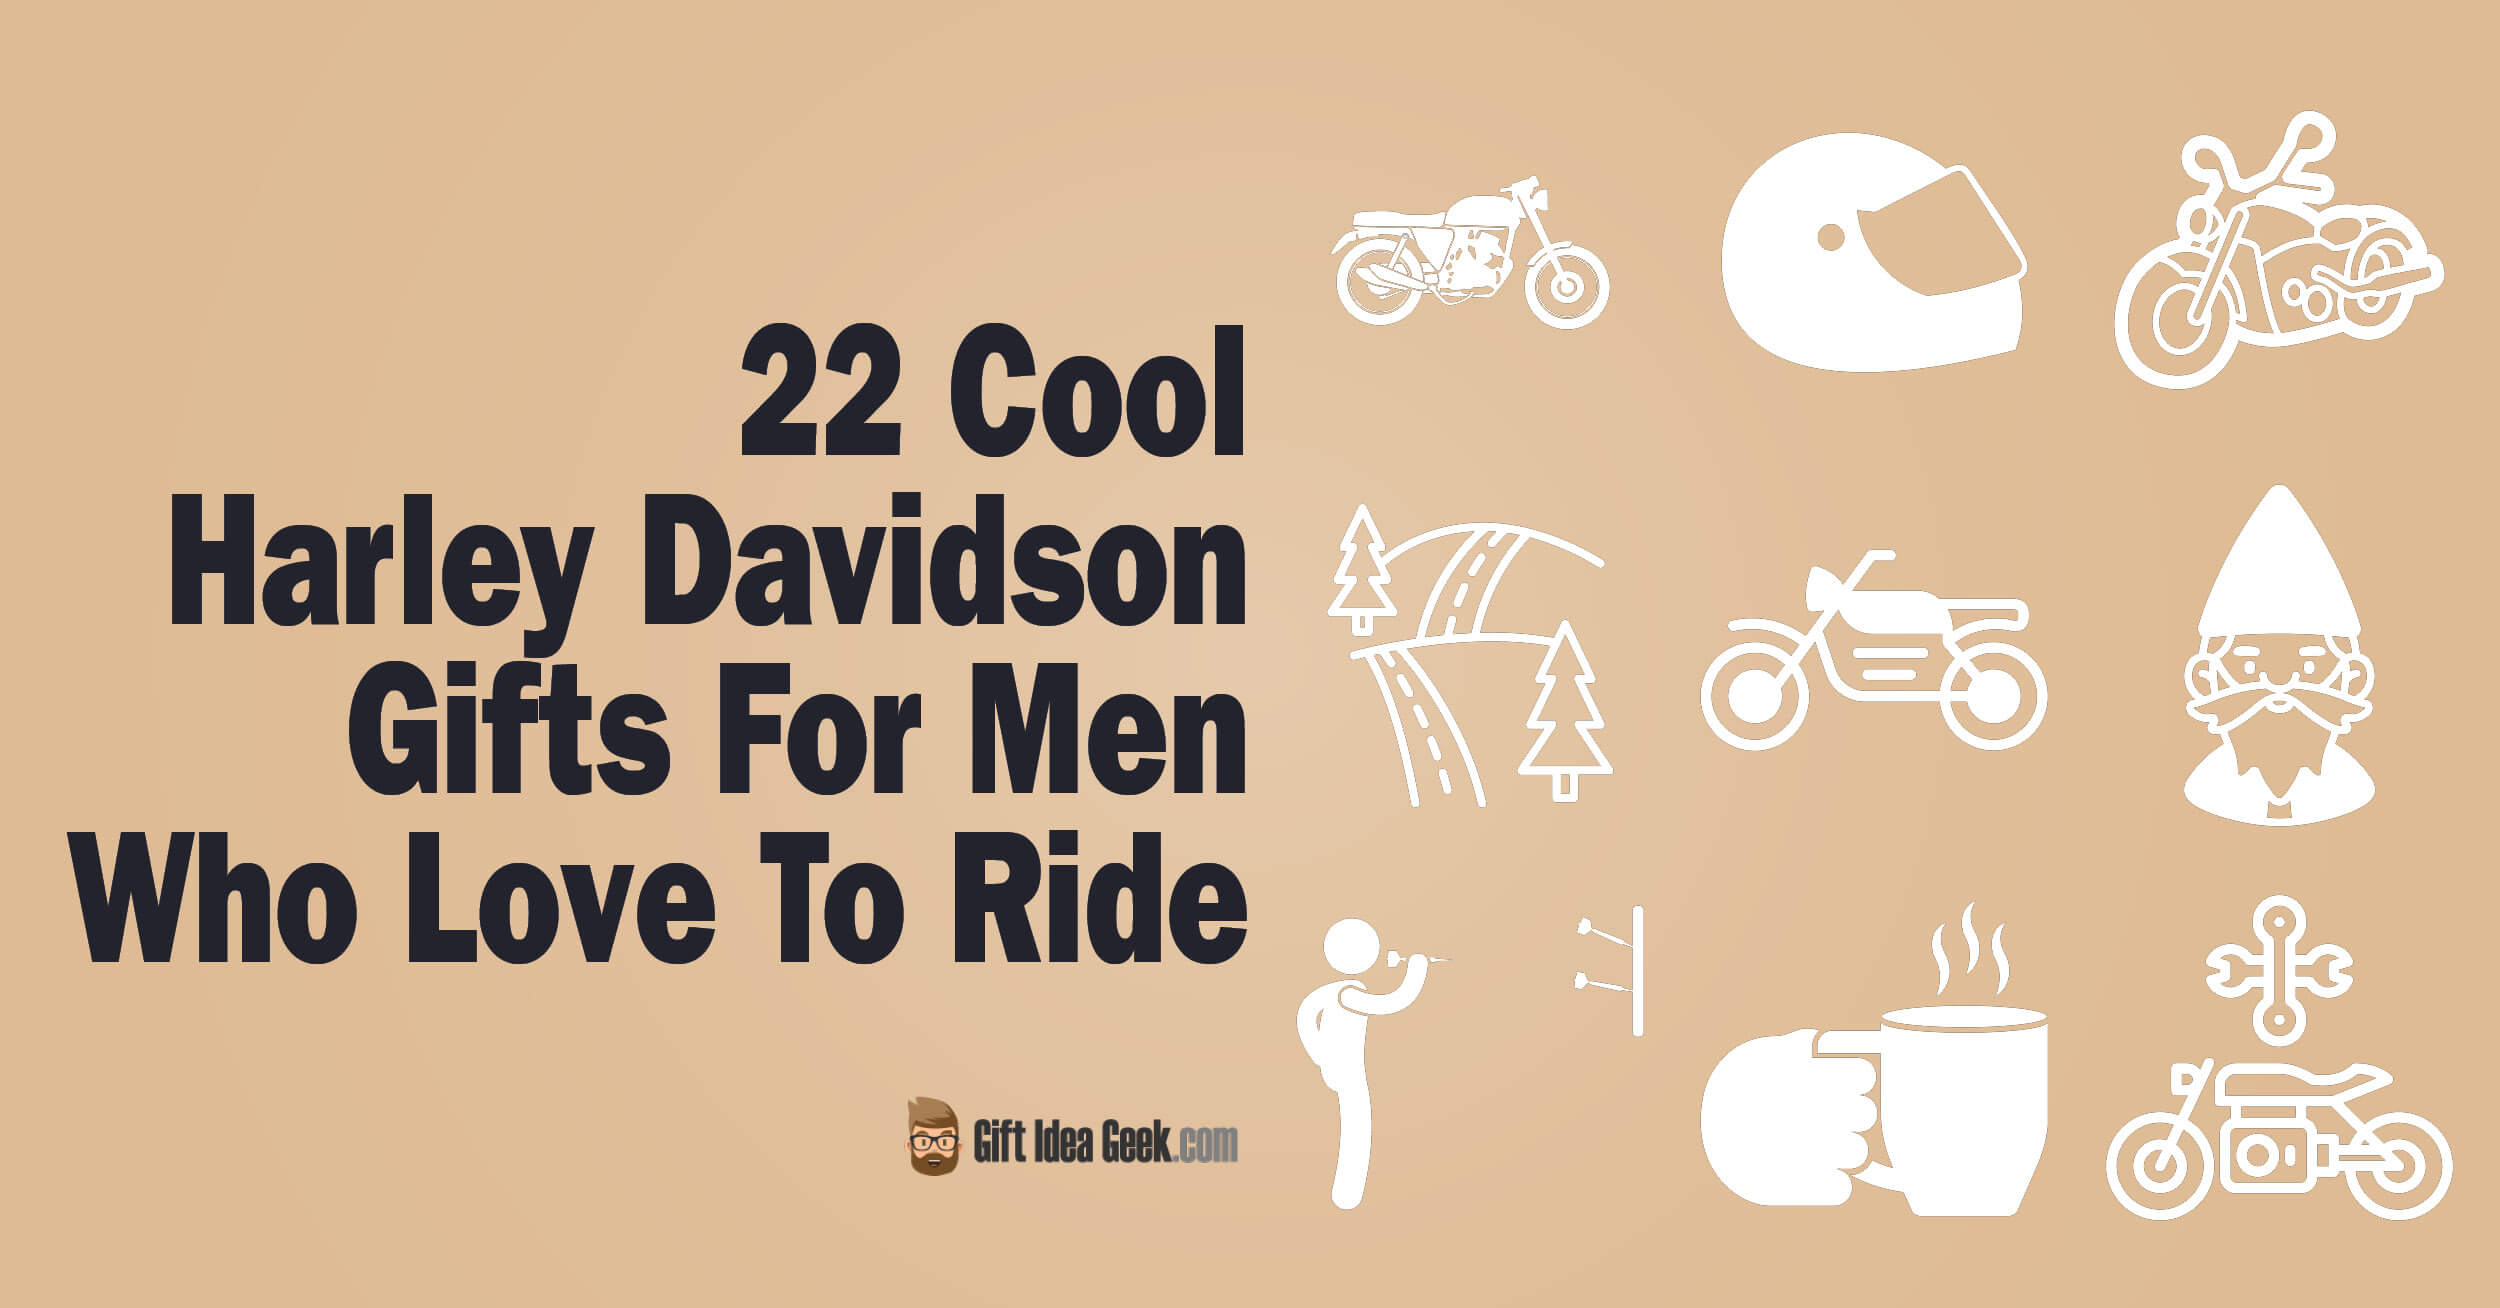 22 Cool Harley Davidson Gifts For Men Who Love To Ride